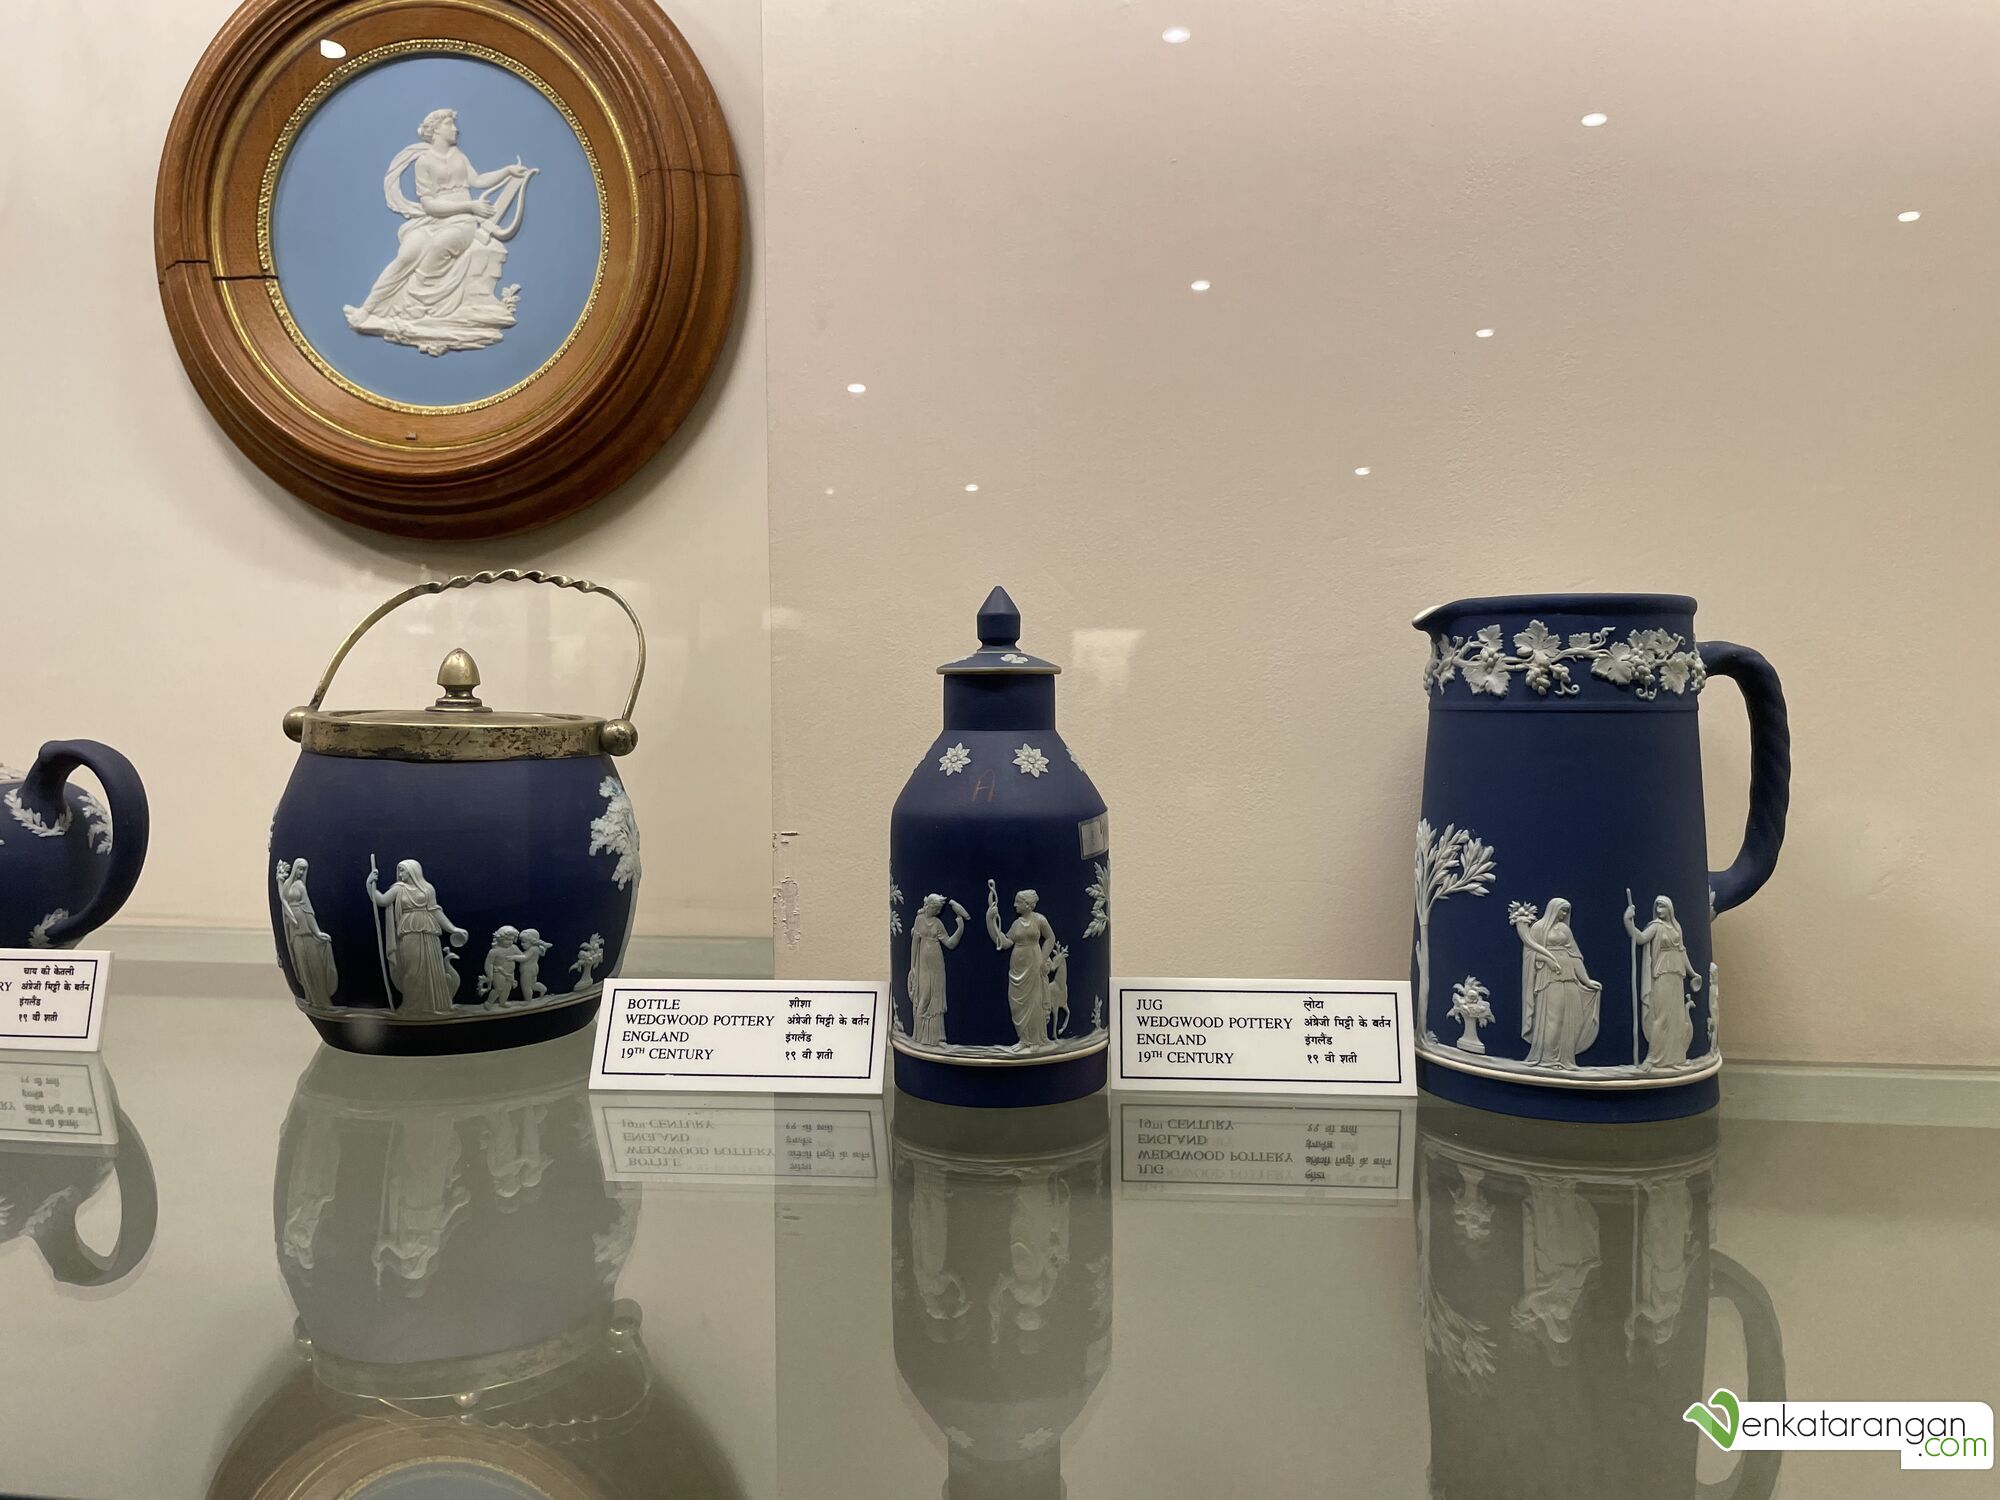 Jug and Bottle - Wedgwood pottery from England, 19th Century